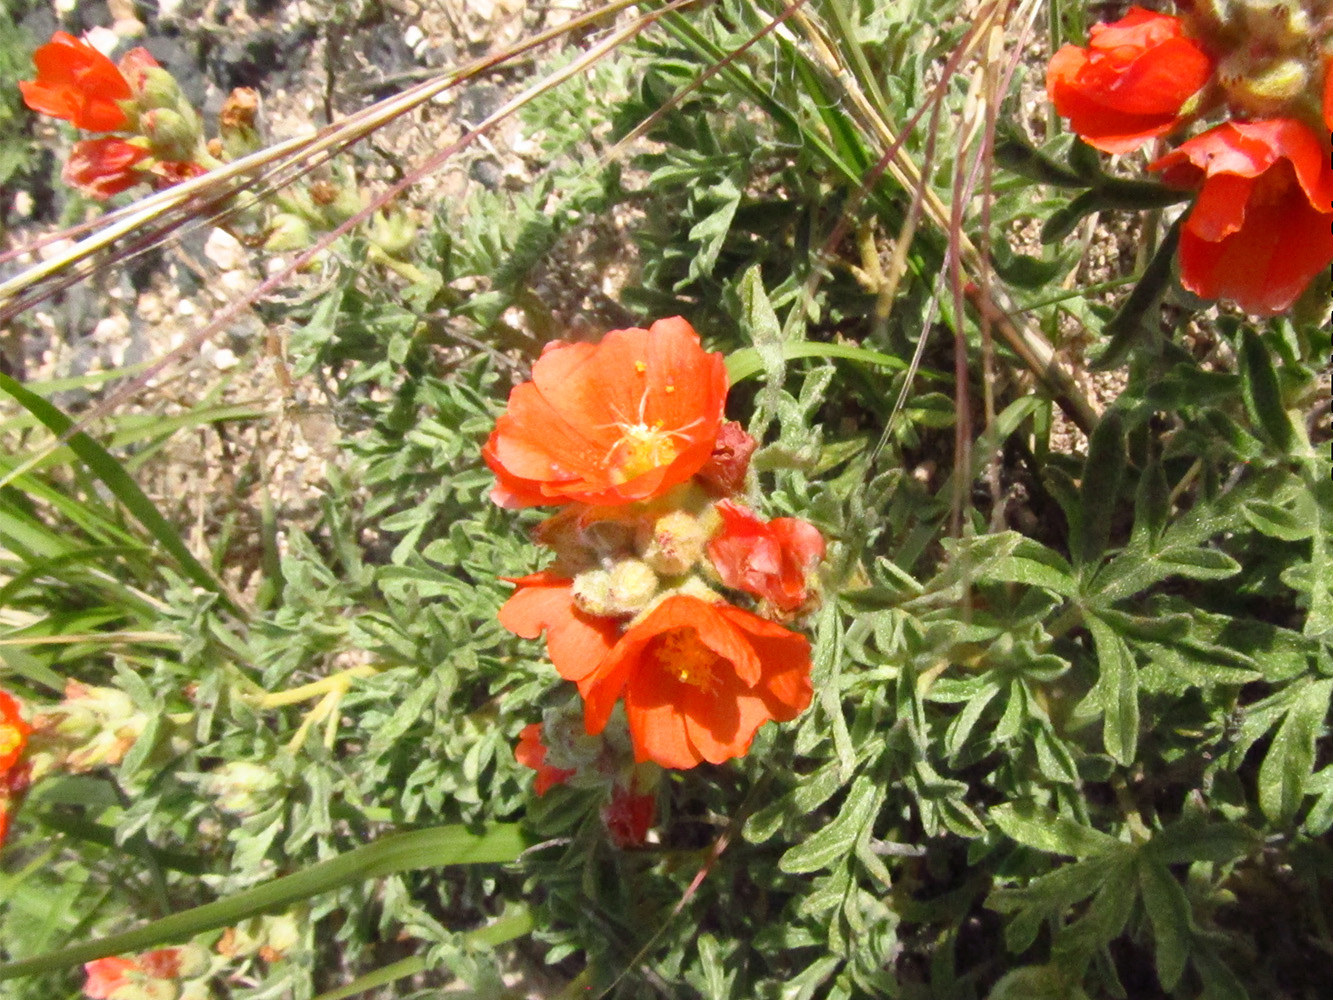 Close-up of green foliage and small orange flowers close together.